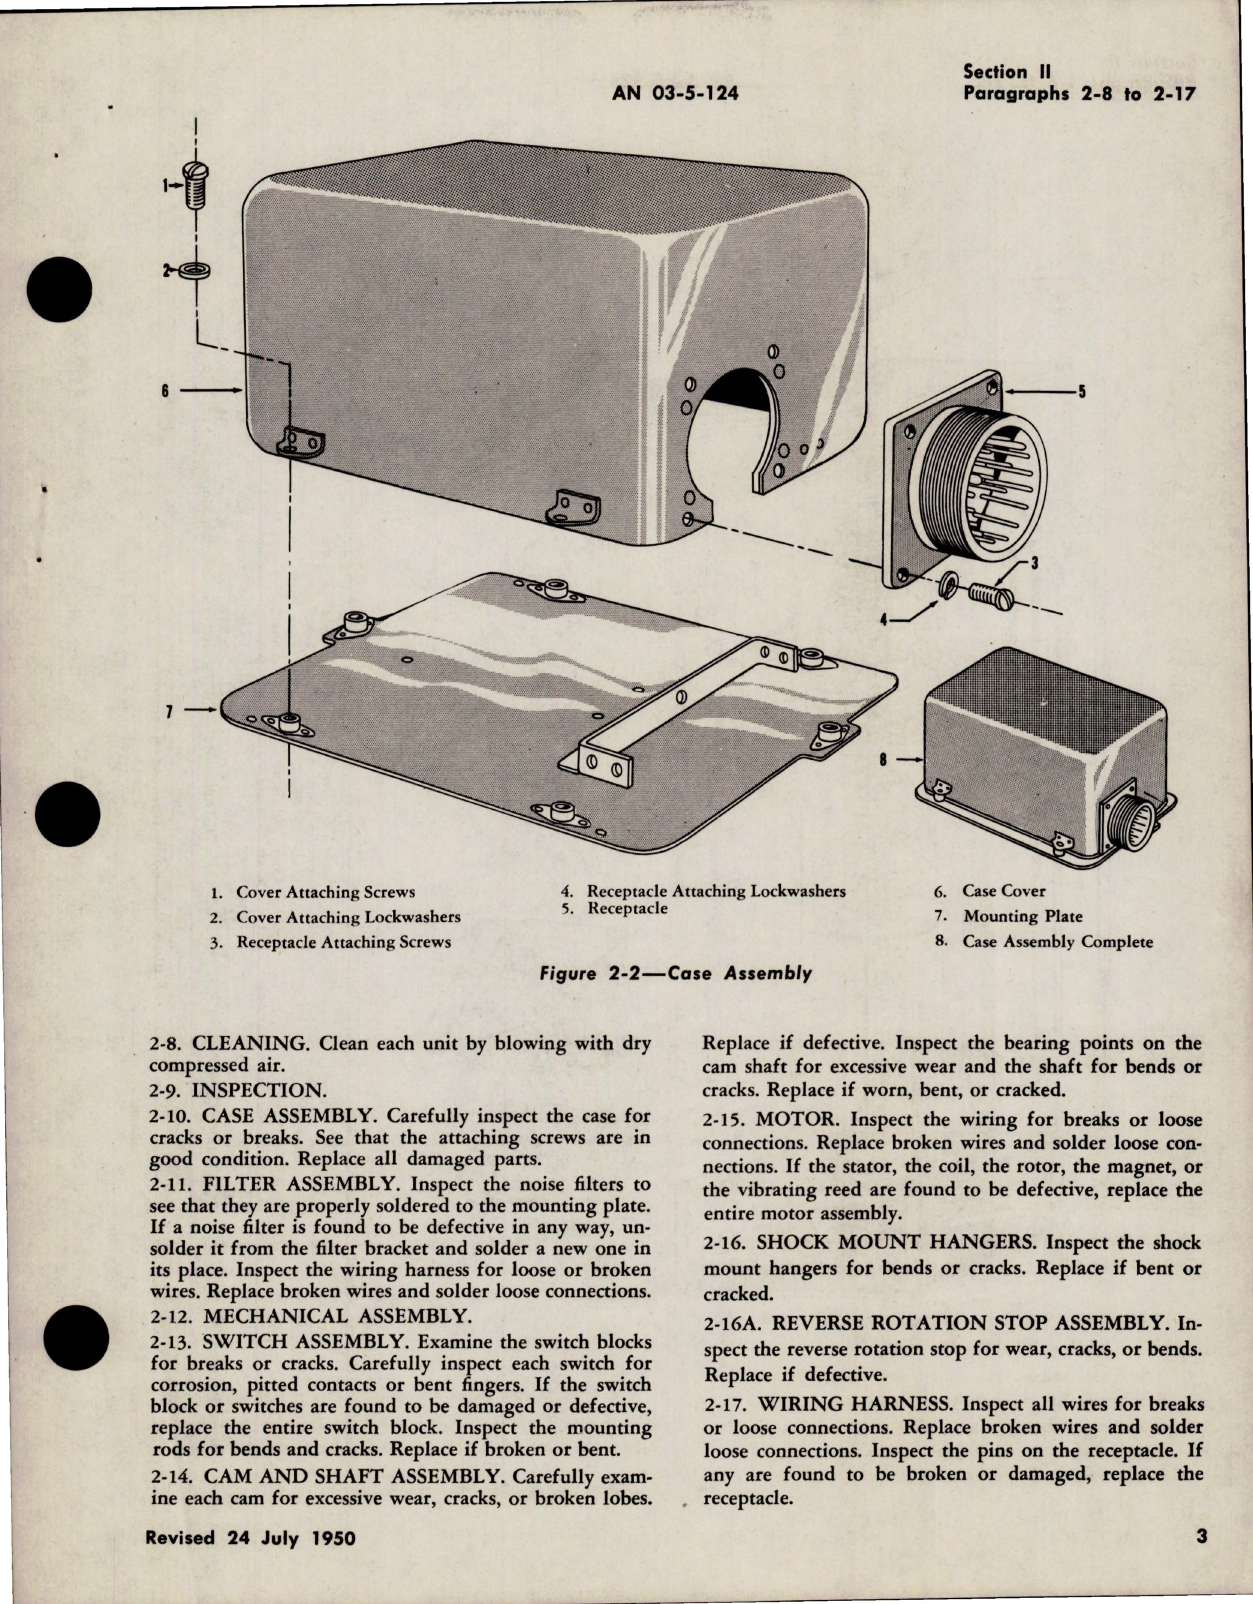 Sample page 5 from AirCorps Library document: Overhaul Instructions for Position Light Flashers - Type C-1 